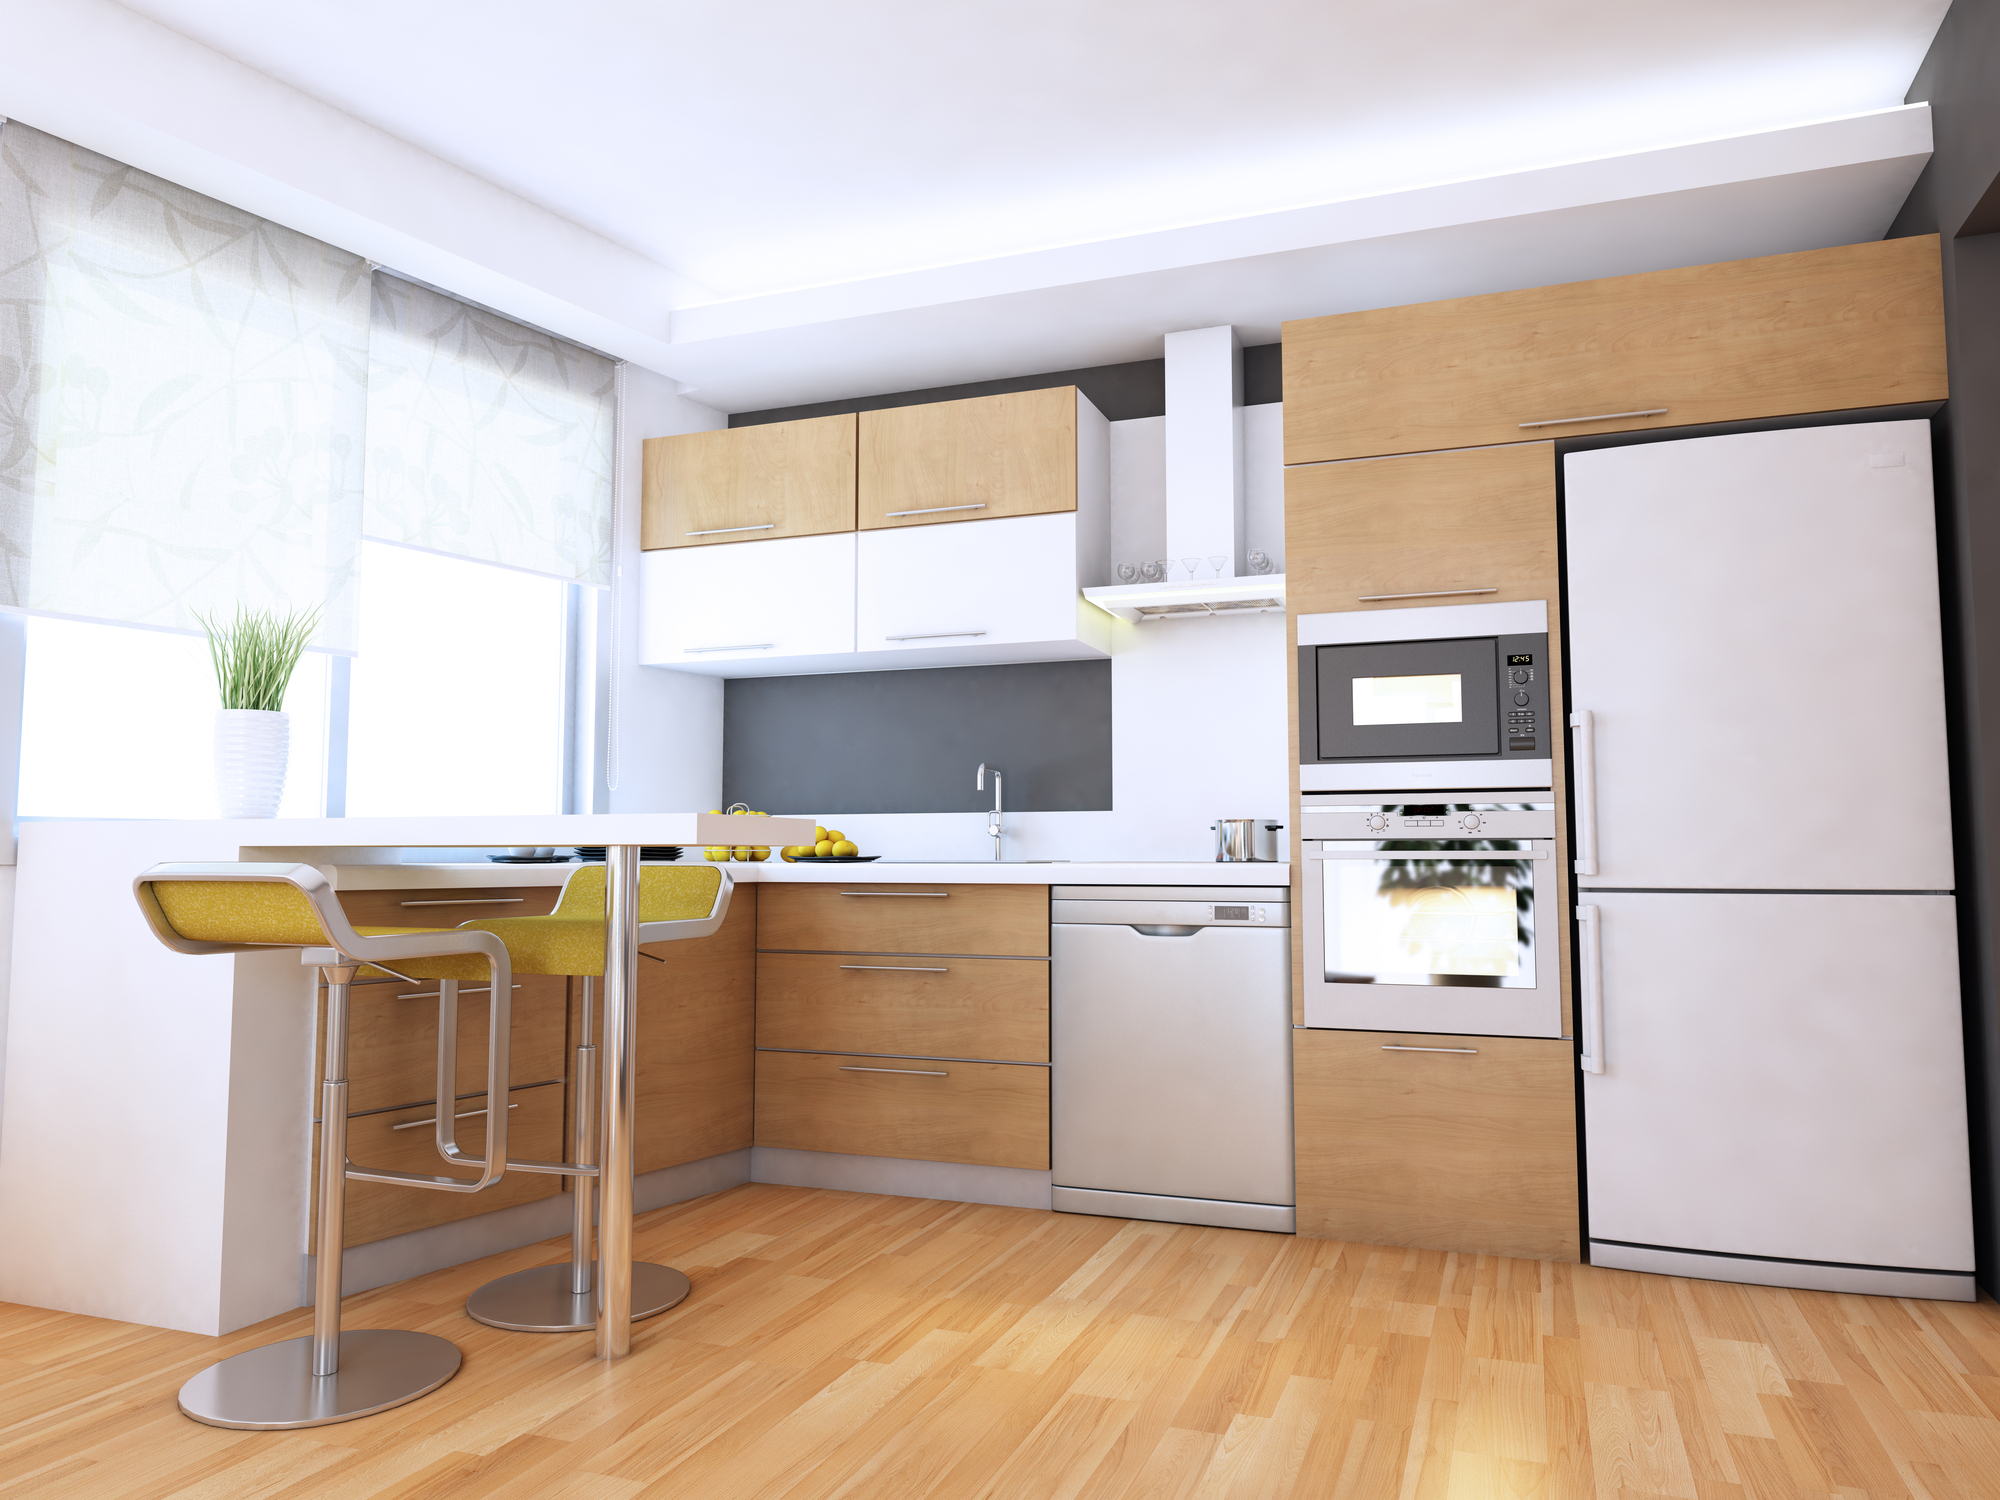 6 tips to create a functional kitchen space